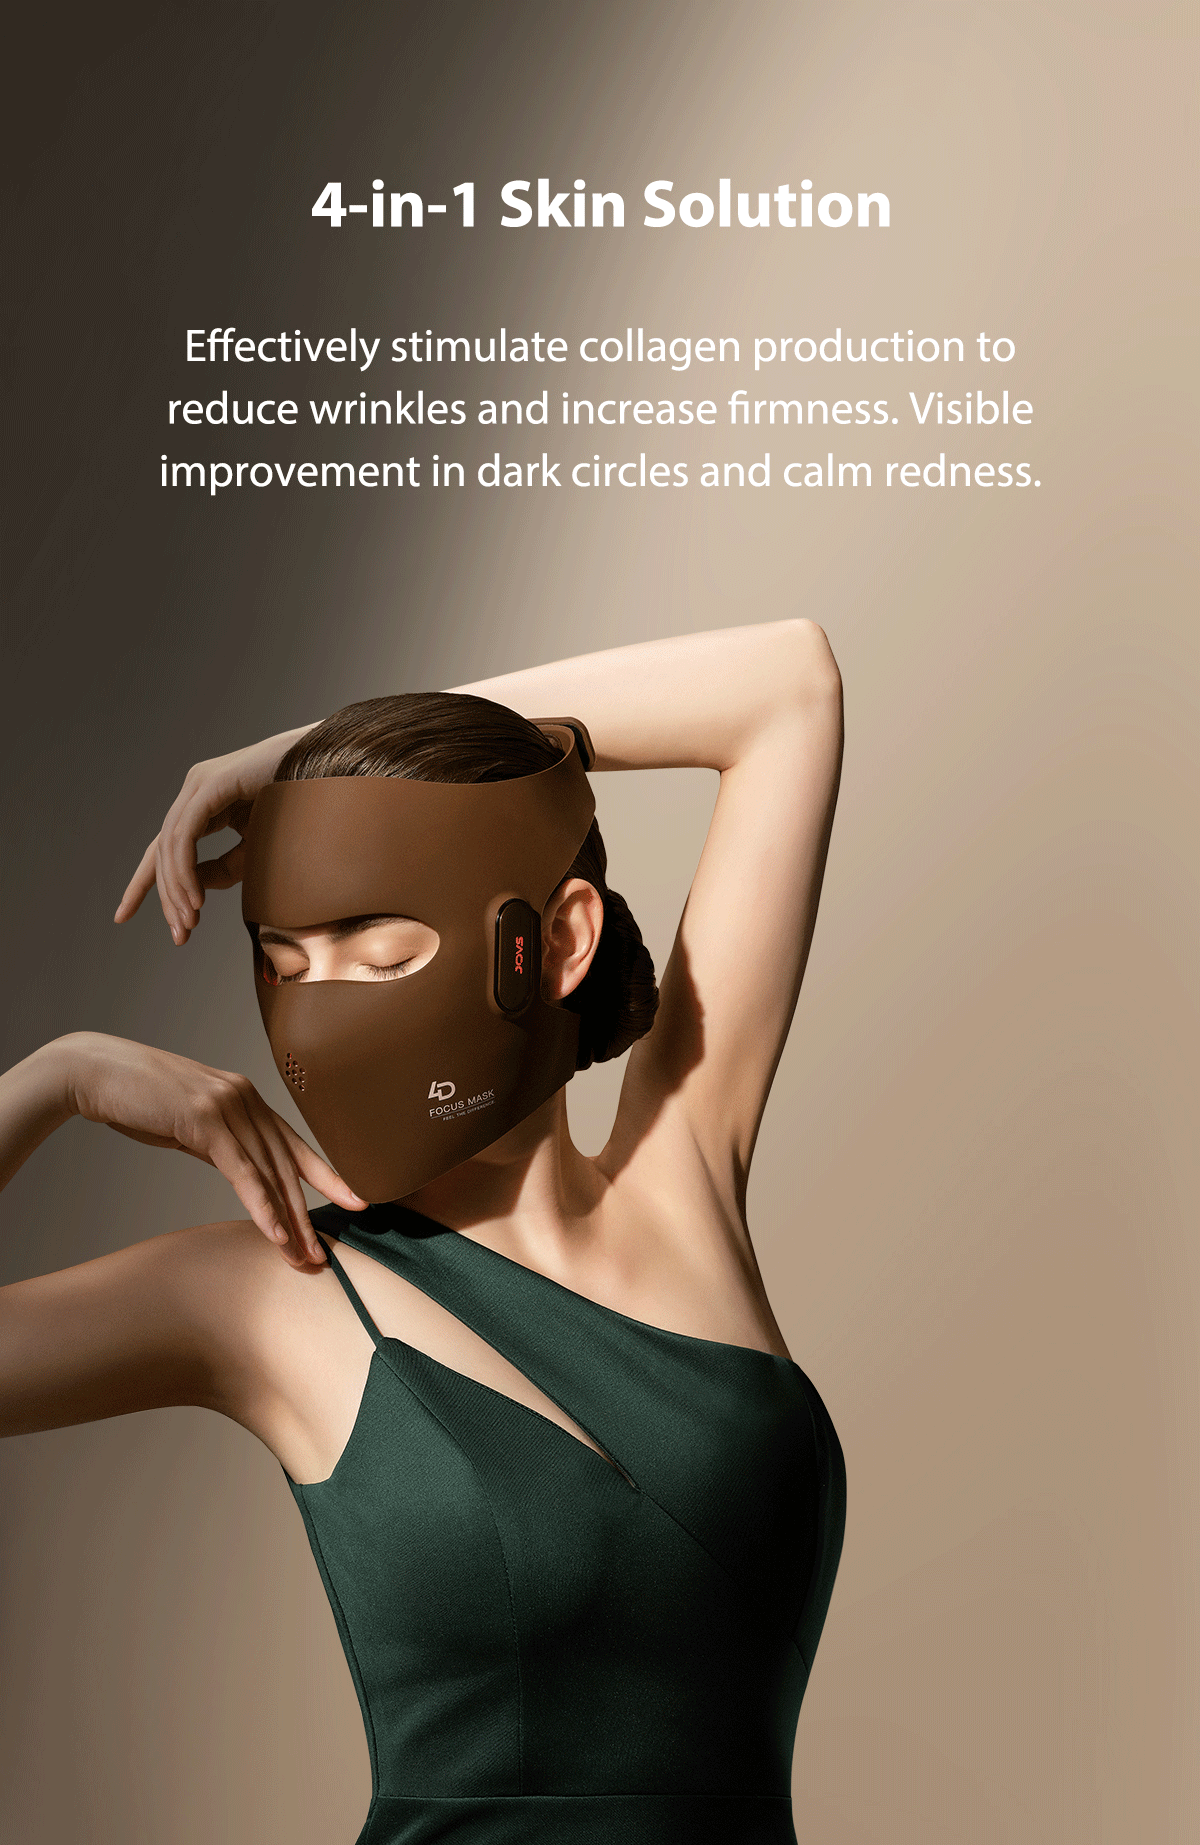 Elegant woman in green dress using JOVS 4D Laser Light Therapy Mask for collagen production, wrinkle reduction, firmness, dark circle improvement, and redness soothing.